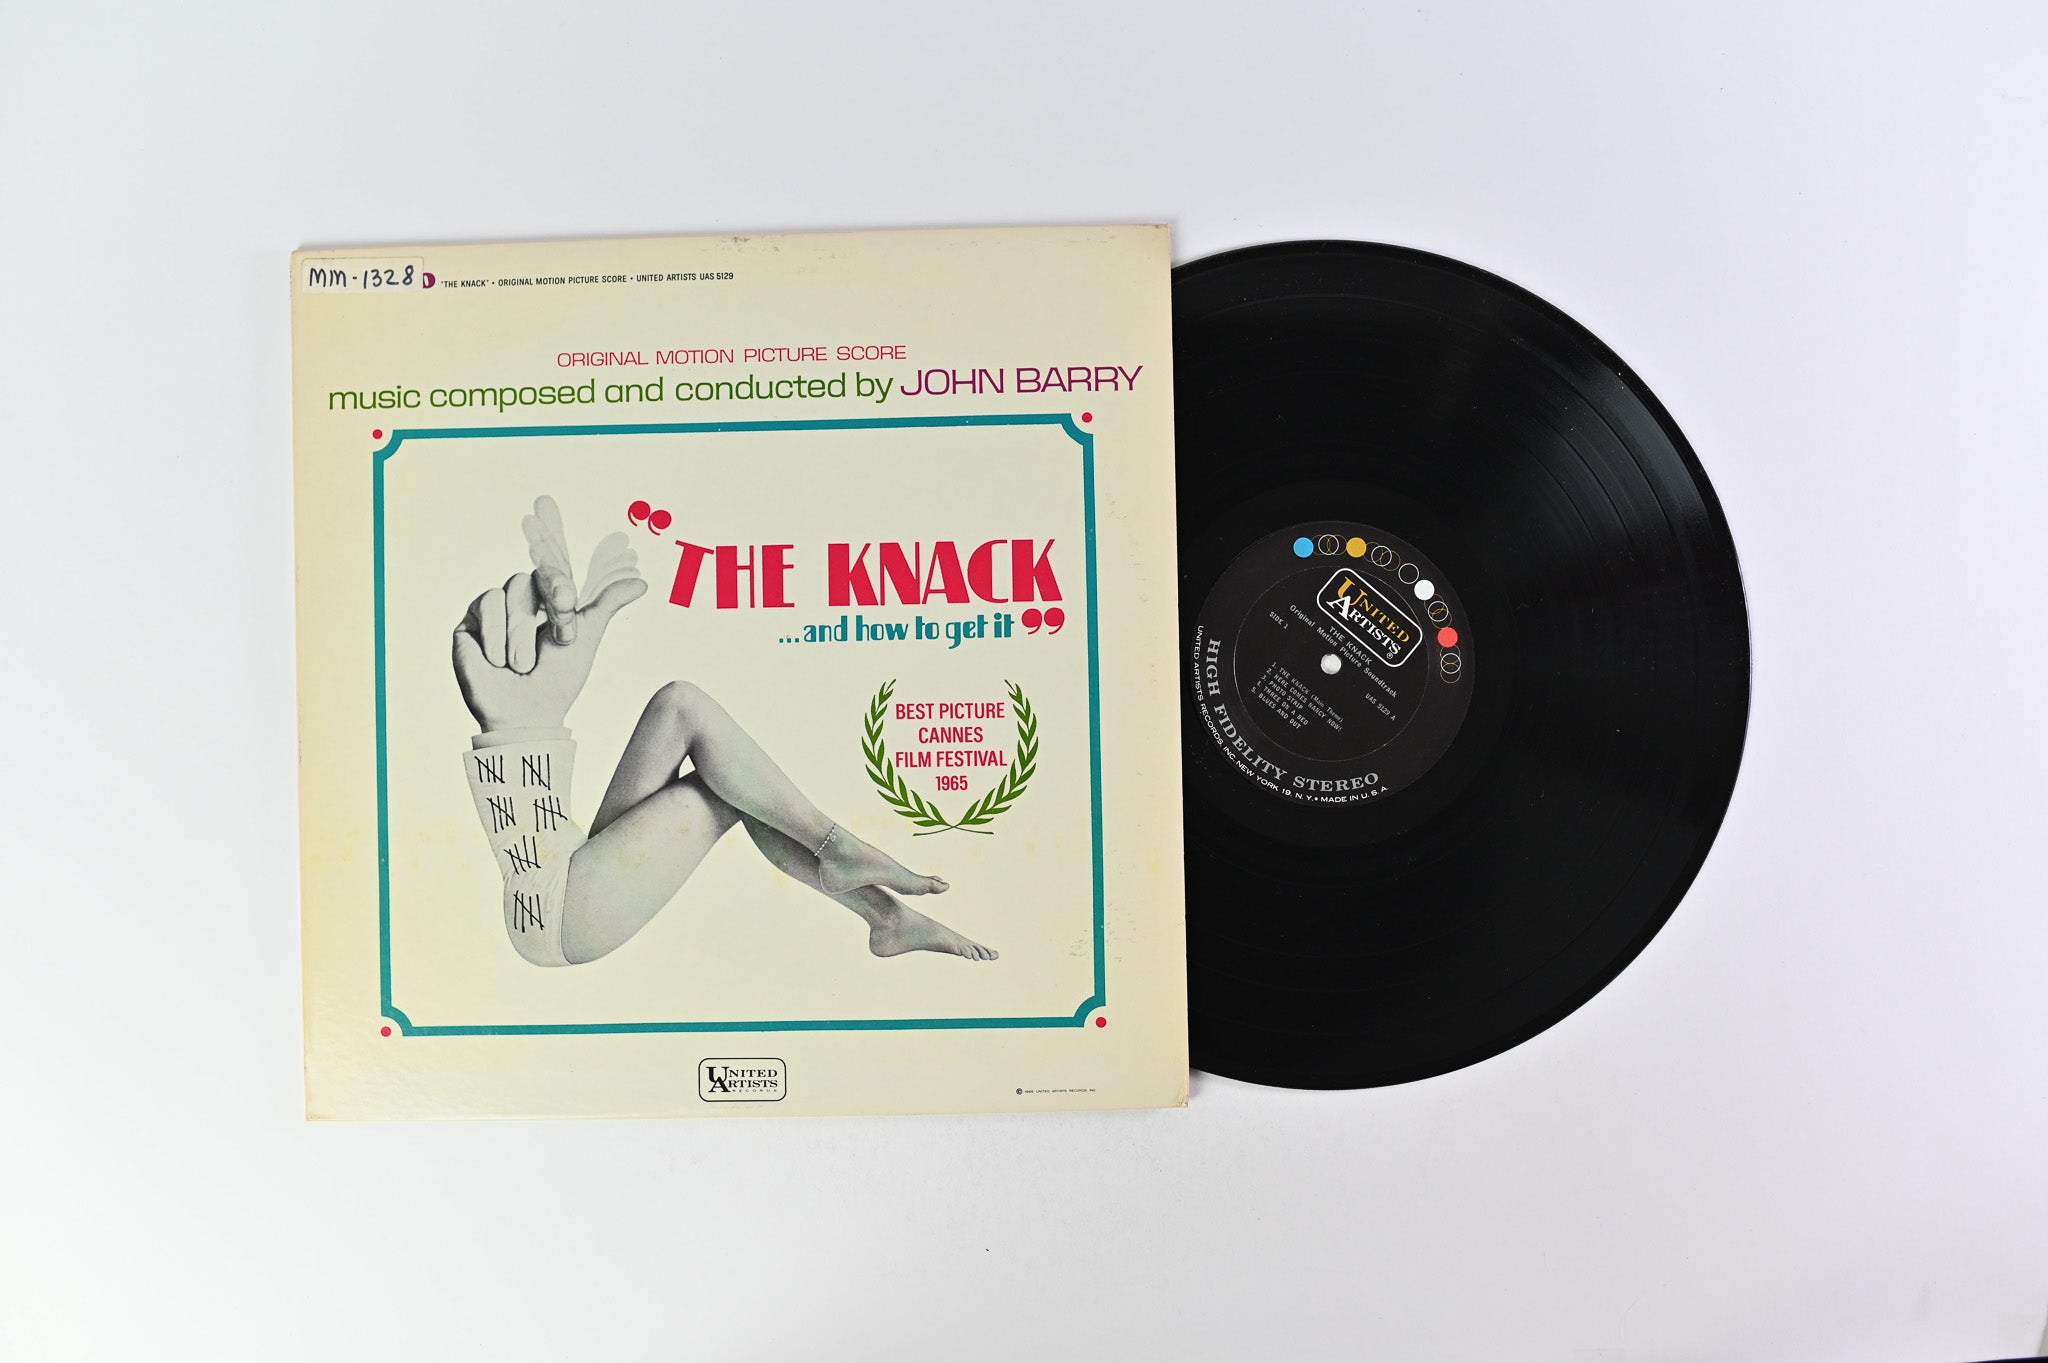 John Barry - The Knack...And How To Get It (Soundtrack) on United Artists Records